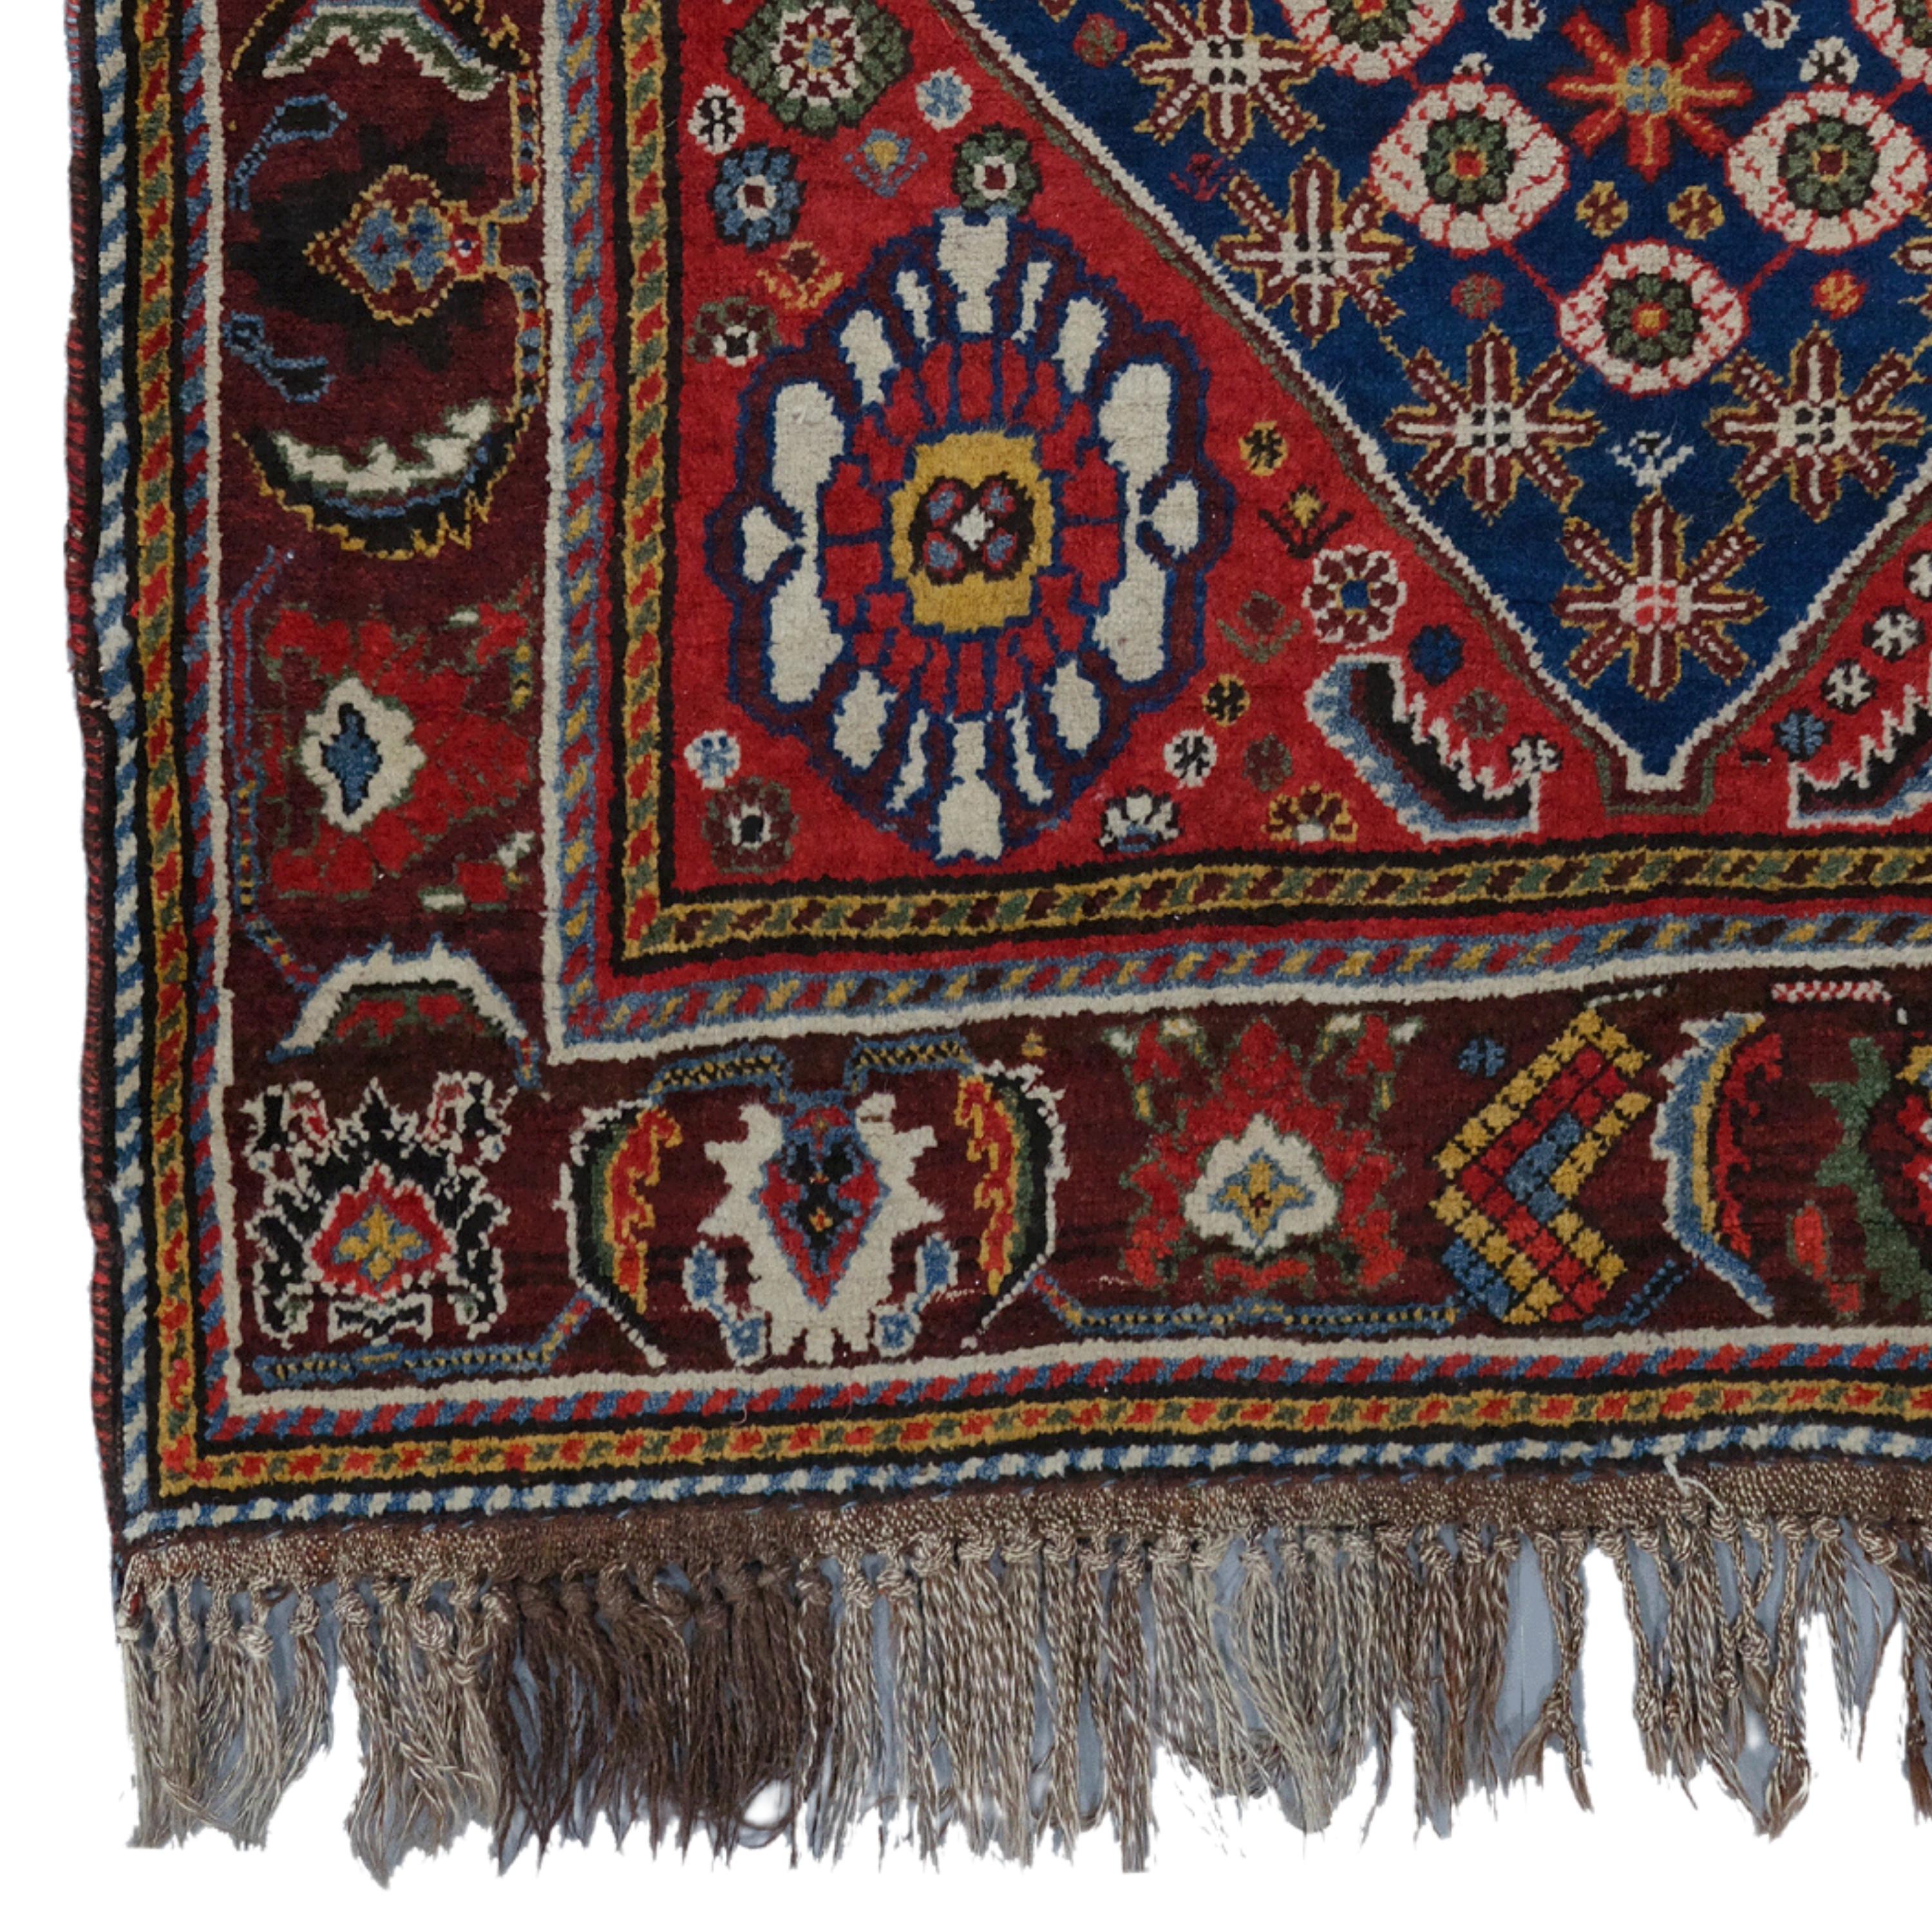 Antique Khamseh Rug  Antique Rugs
Late 19th Century Khamseh Rug
Size: 135×220 cm  4,42x7,21 Ft

Take a step-by-step journey into history with this elegant 19th-century antique khamseh rug. Its rich color palette and intricate patterns showcase the